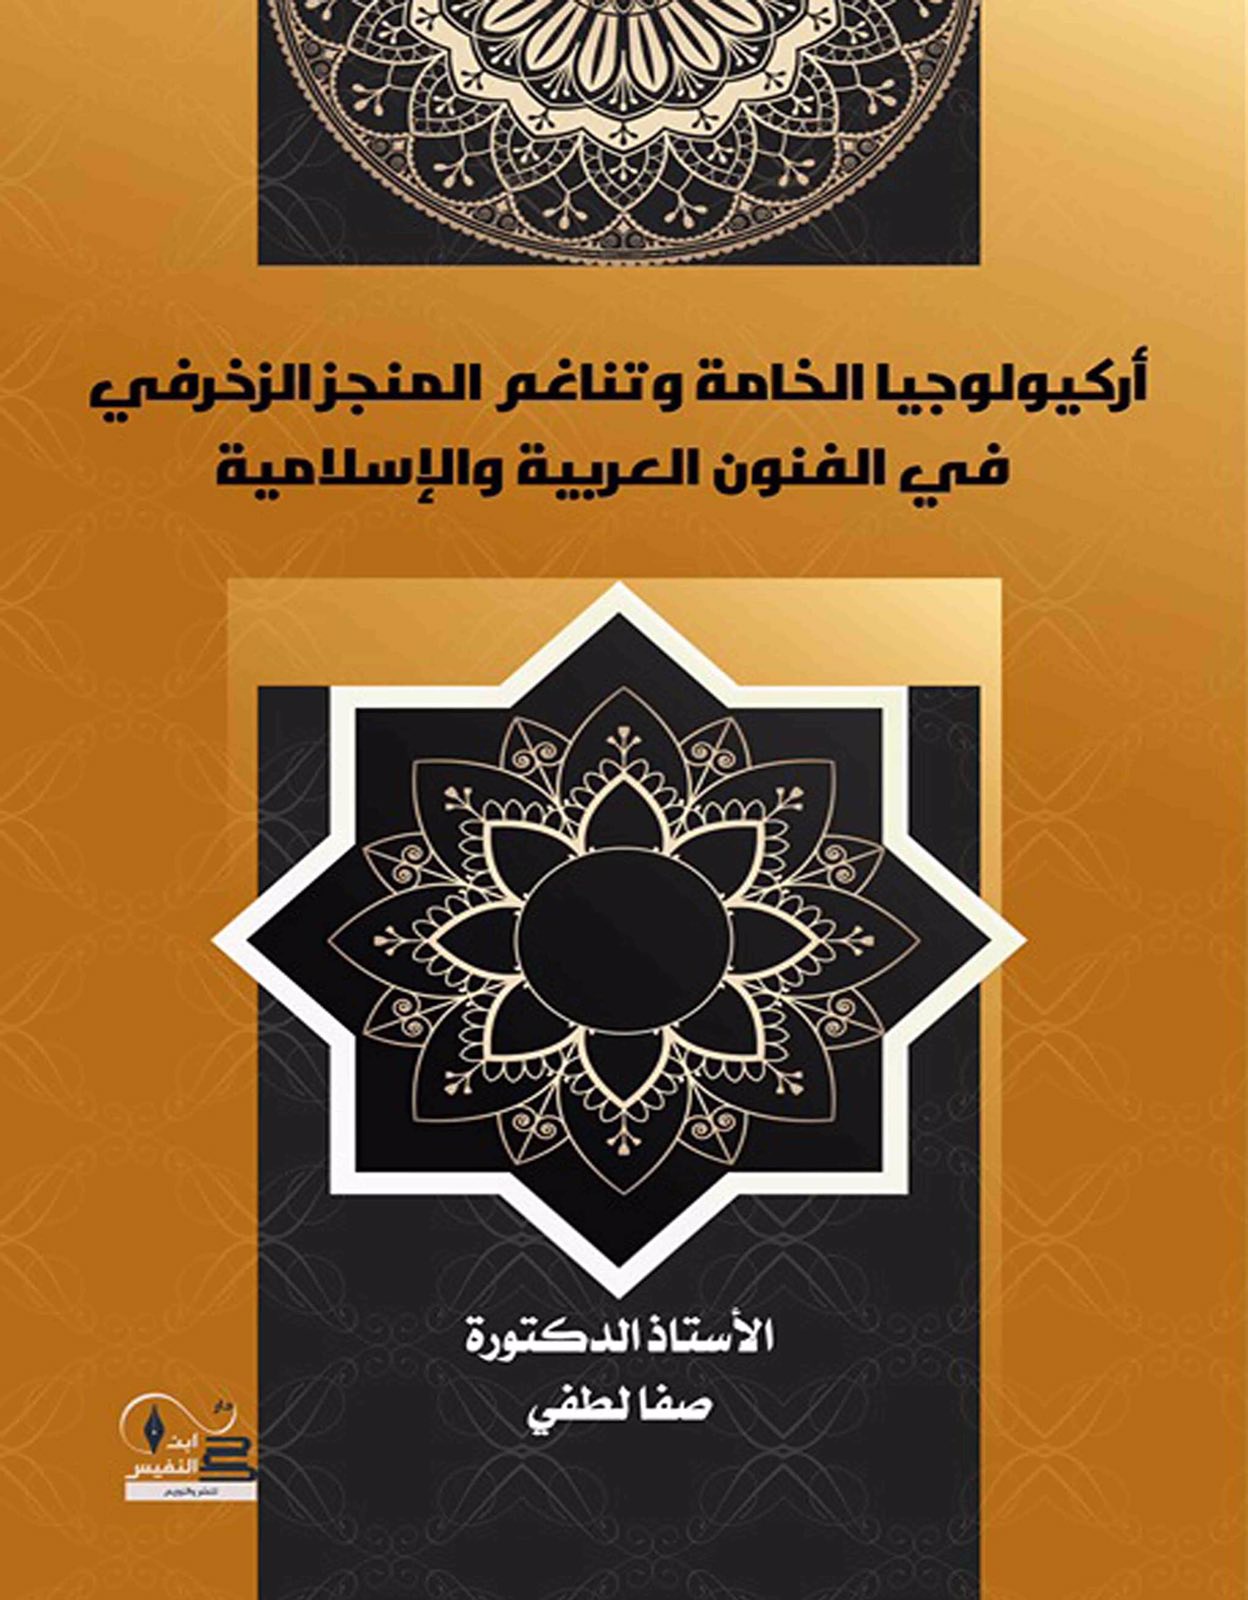 Archeology of the Raw Material and the Harmony of the Decorative Work in the Islamic Arts